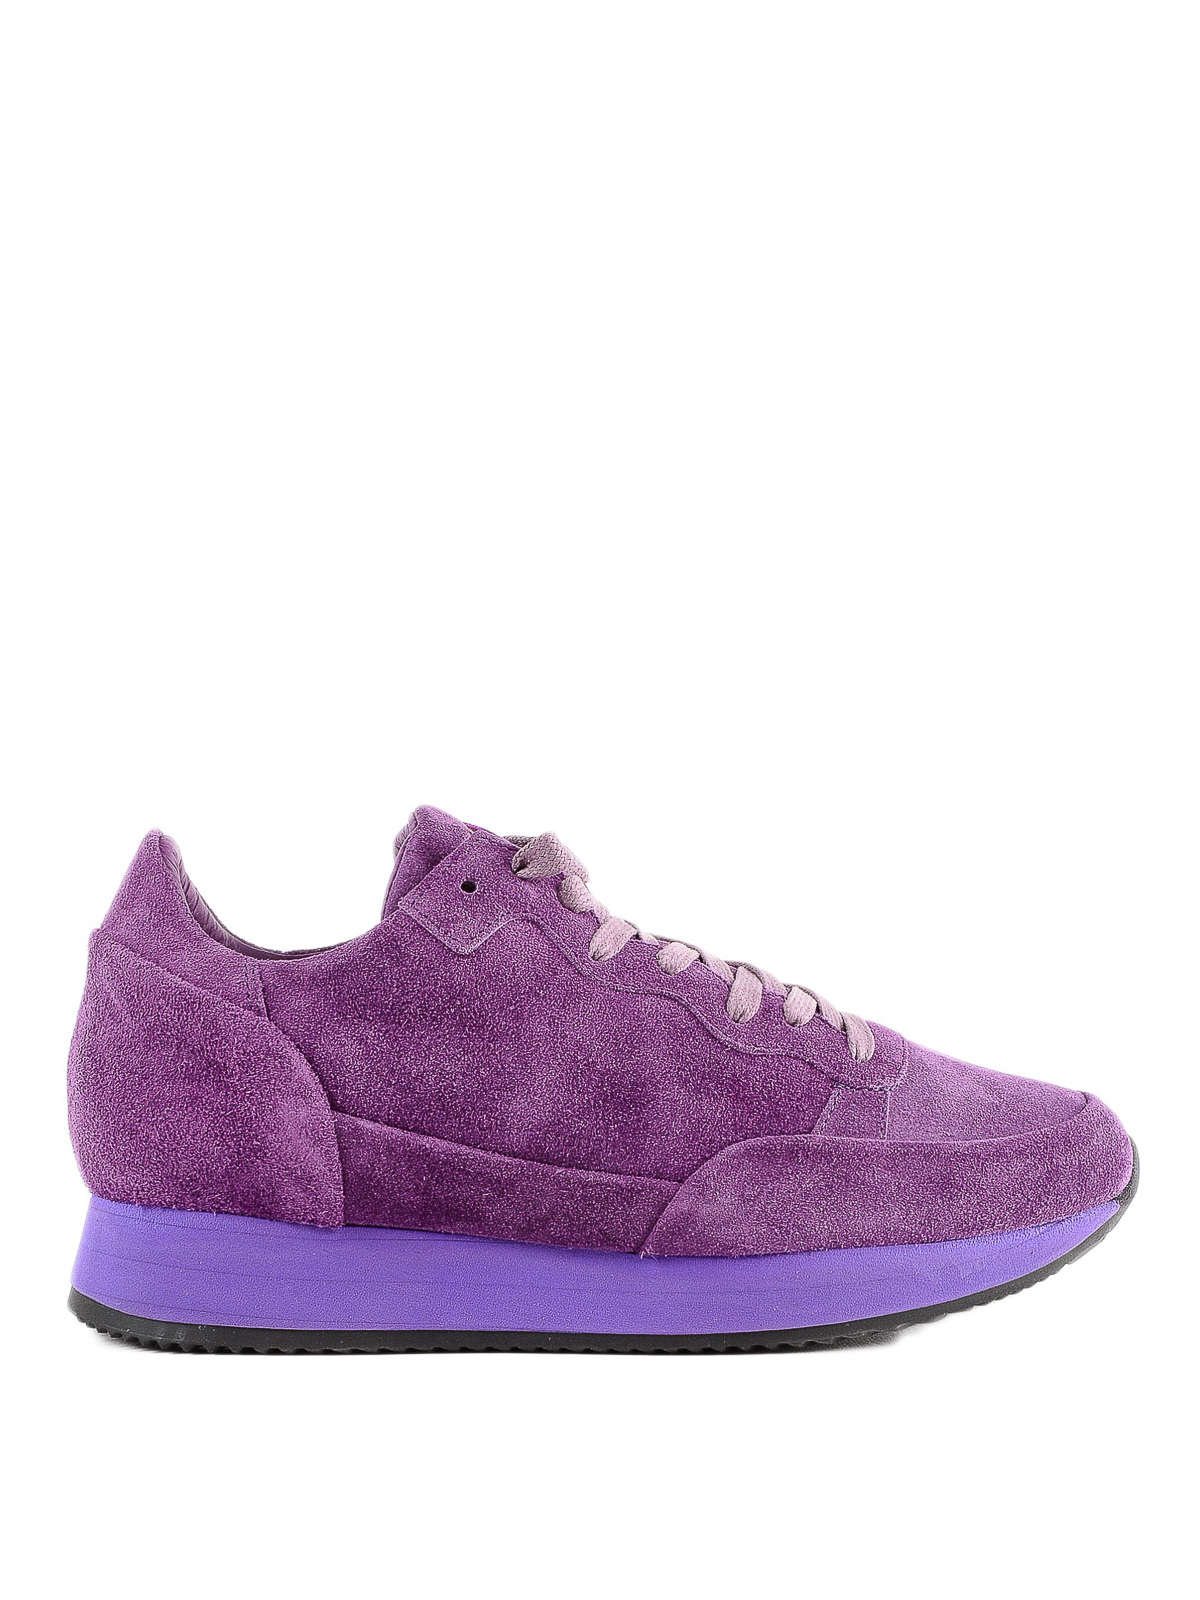 purple suede trainers